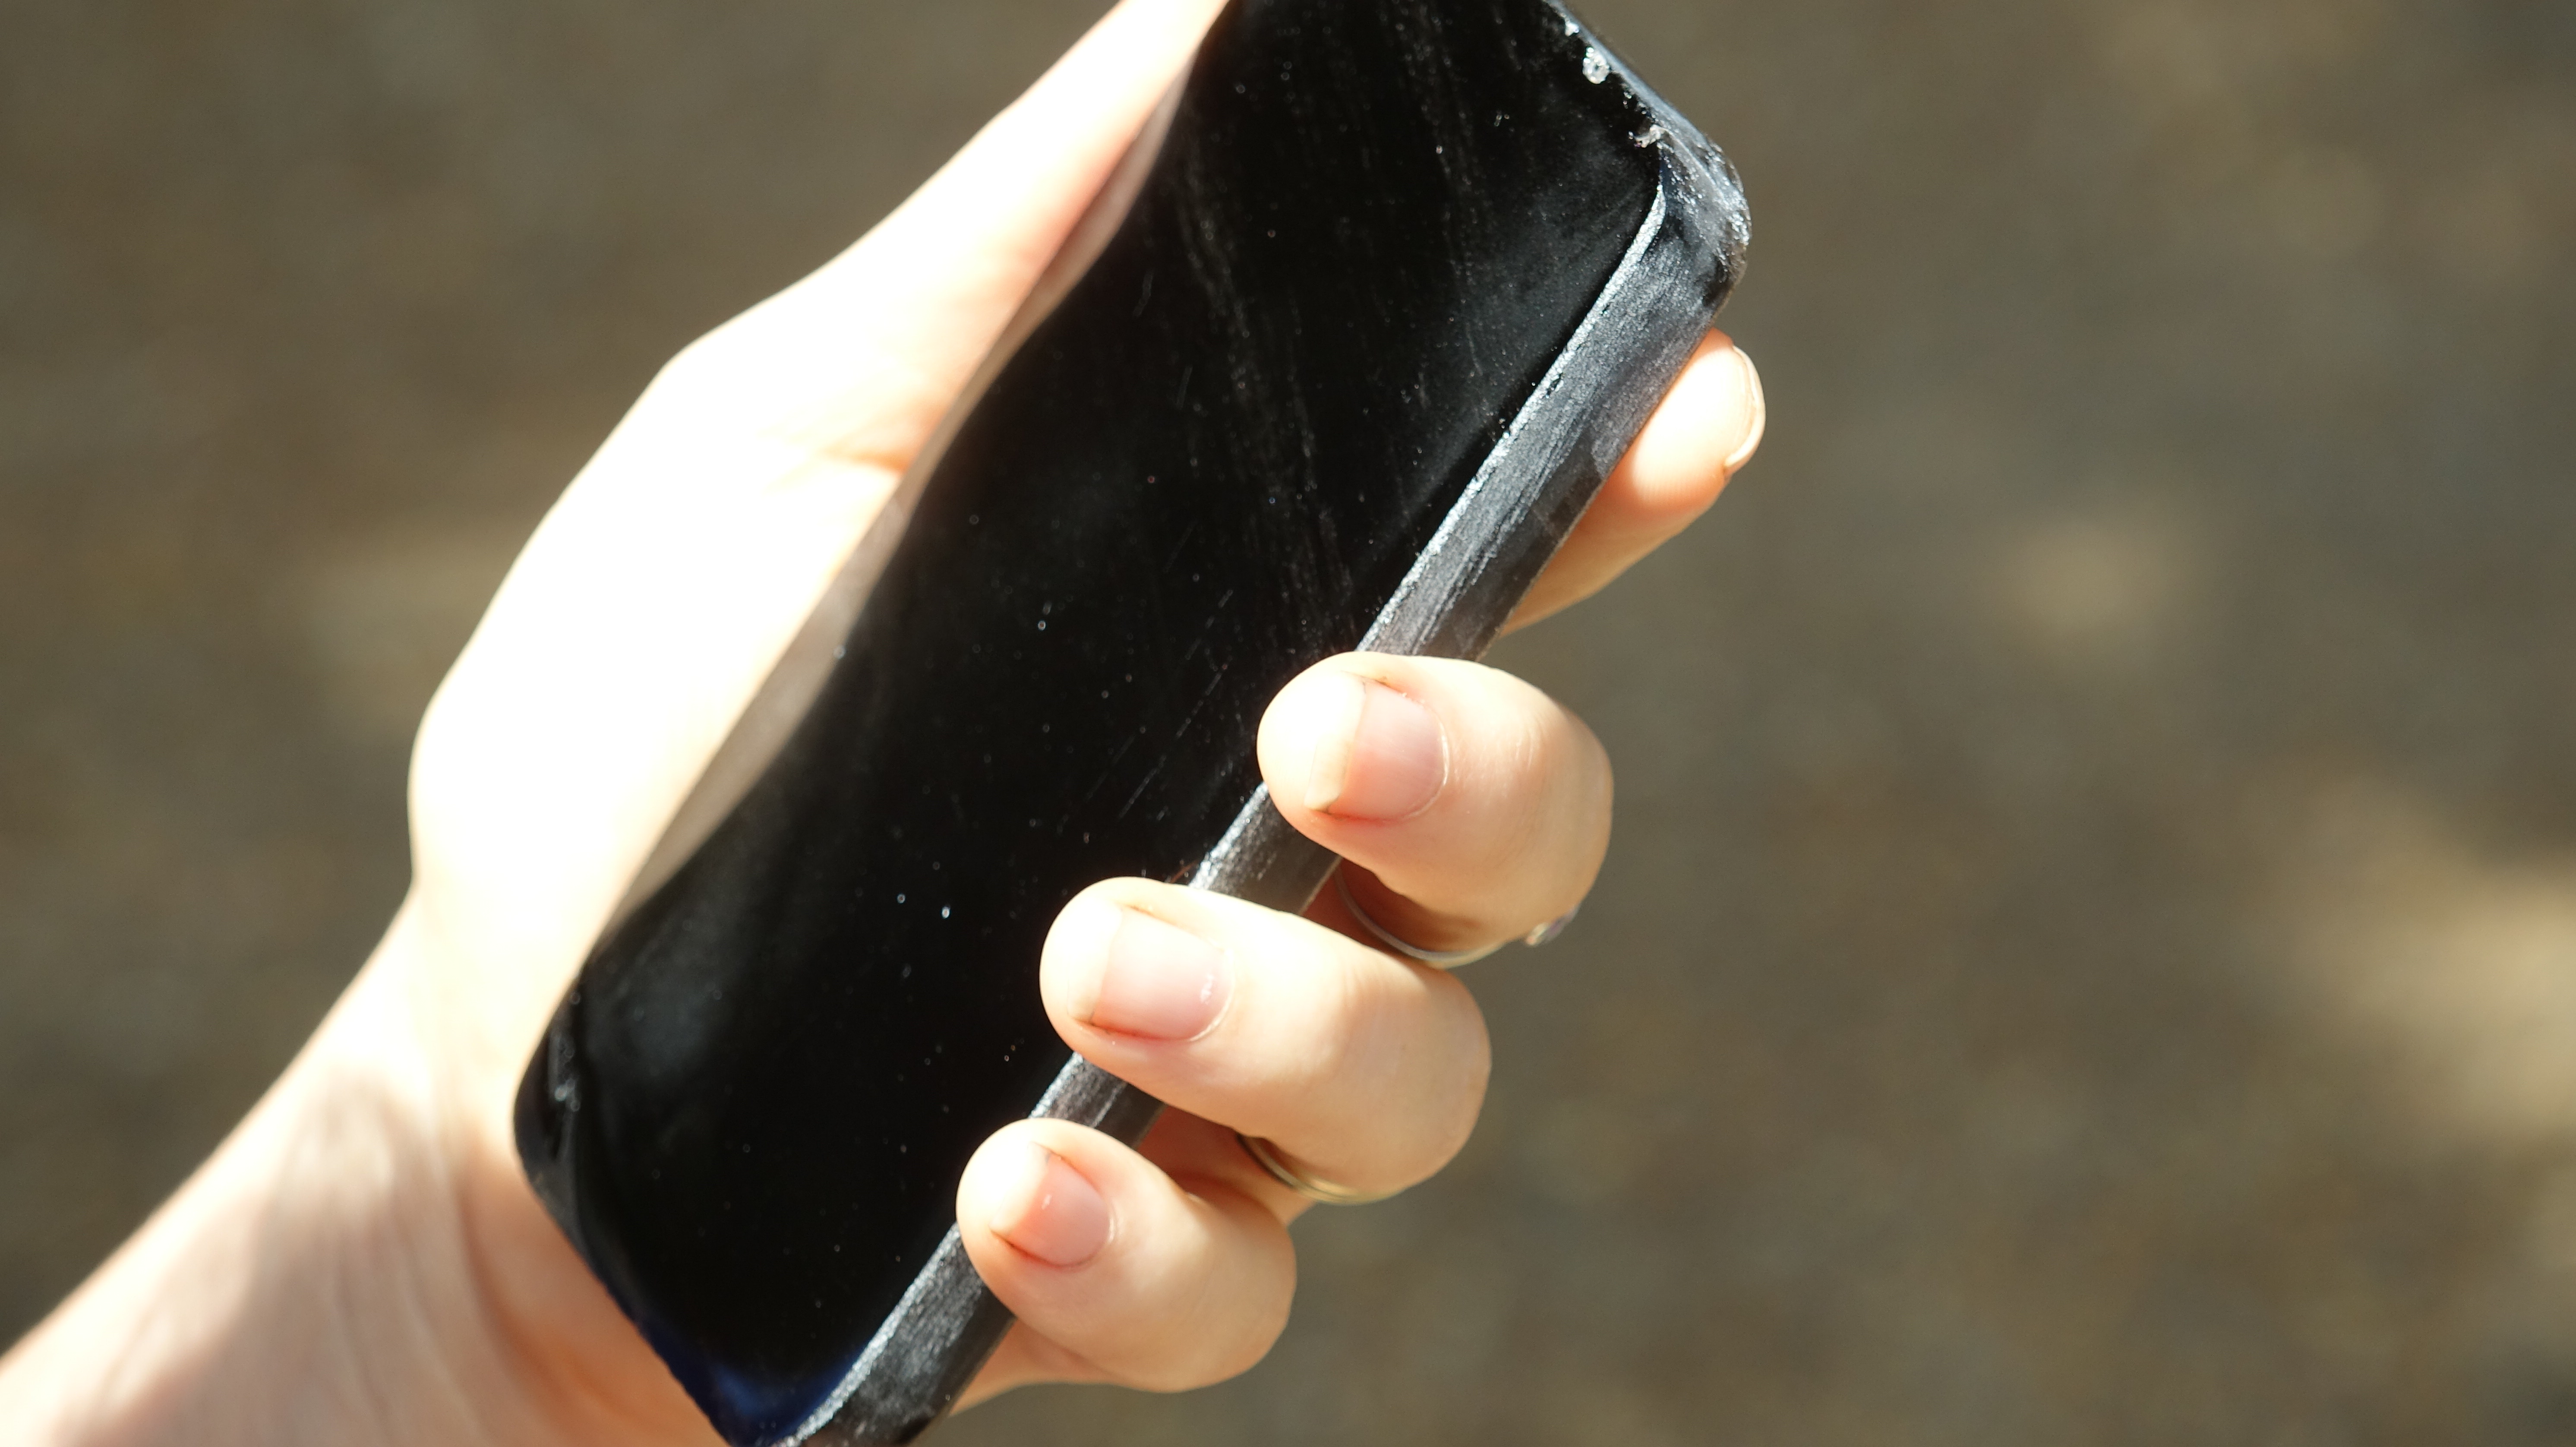 photo of a hand with a phone